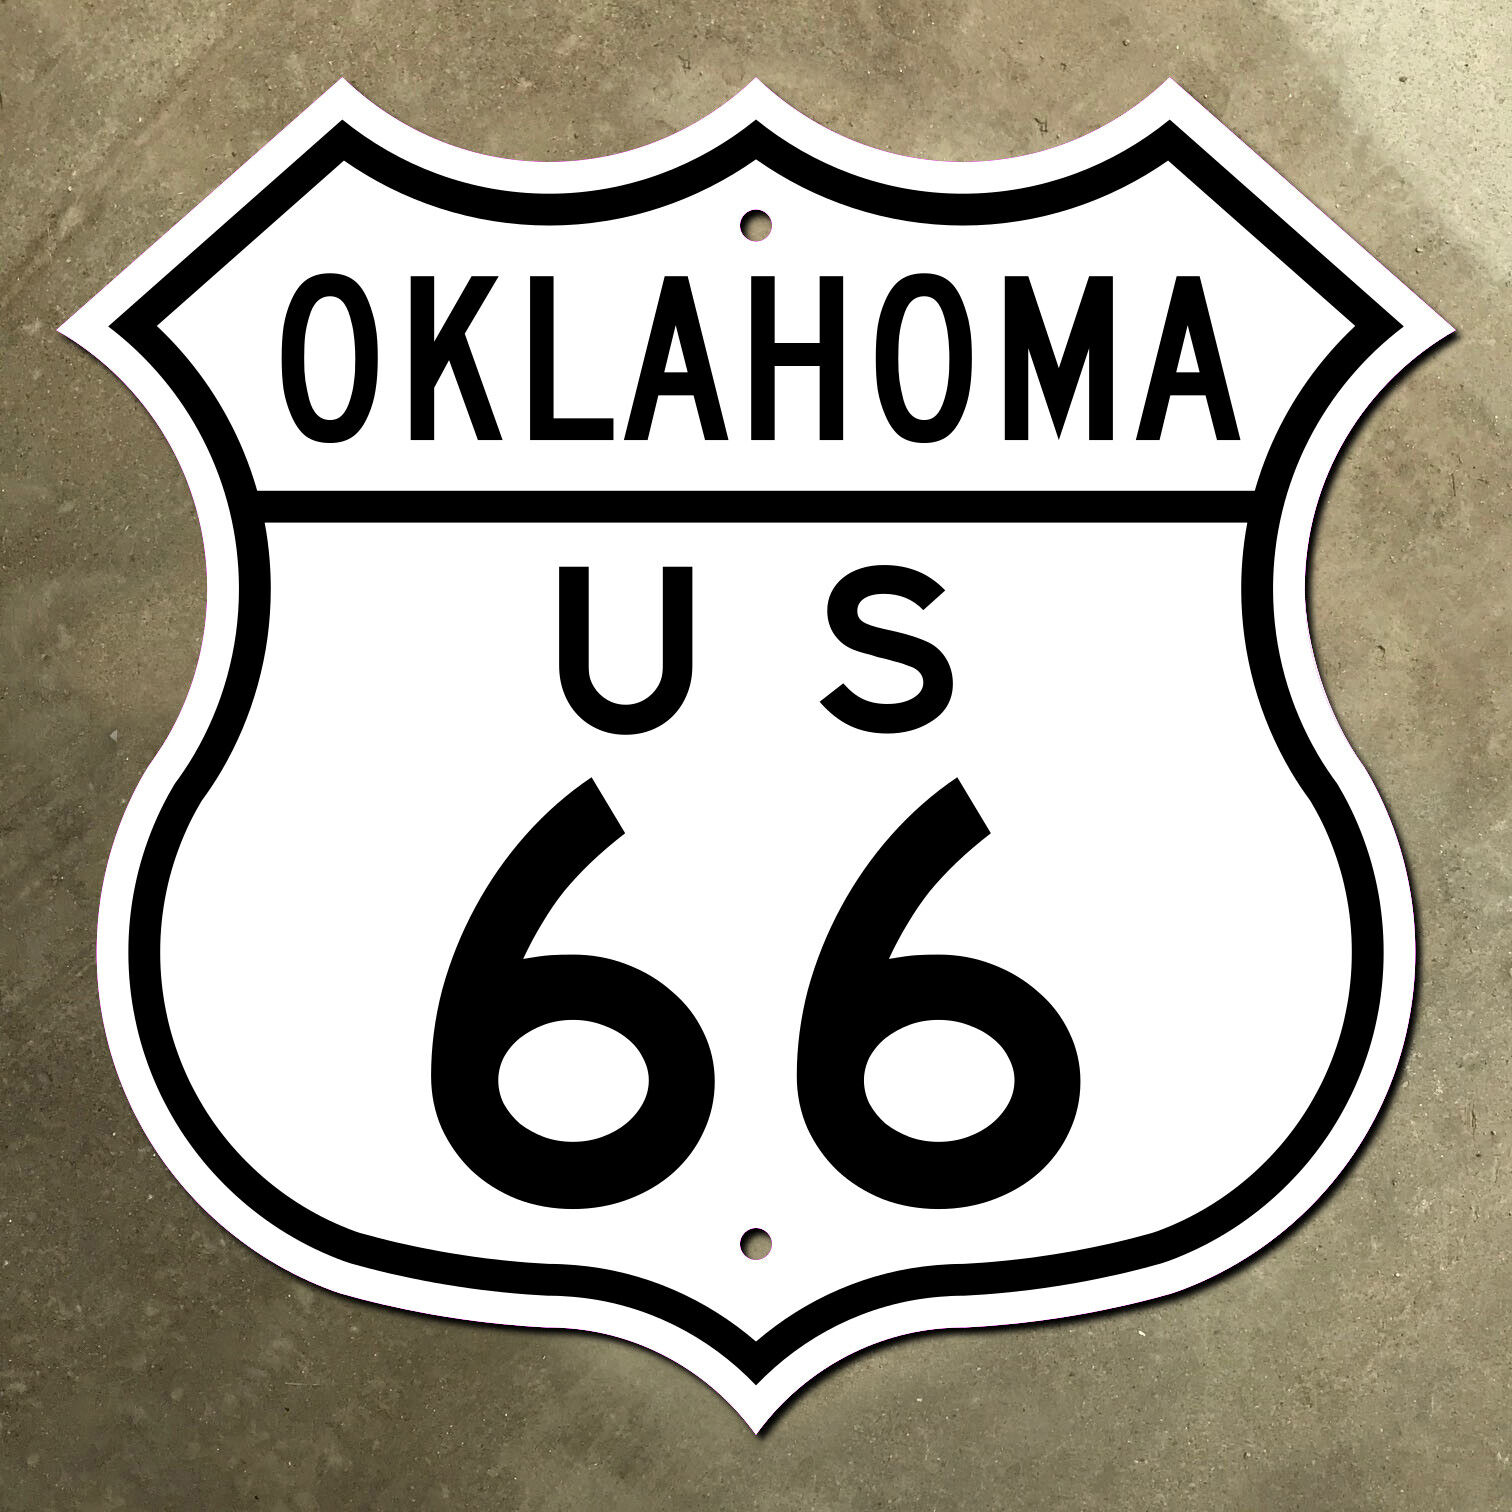 Oklahoma US route 66 highway marker sign 1948 mother road Will Rogers Tulsa